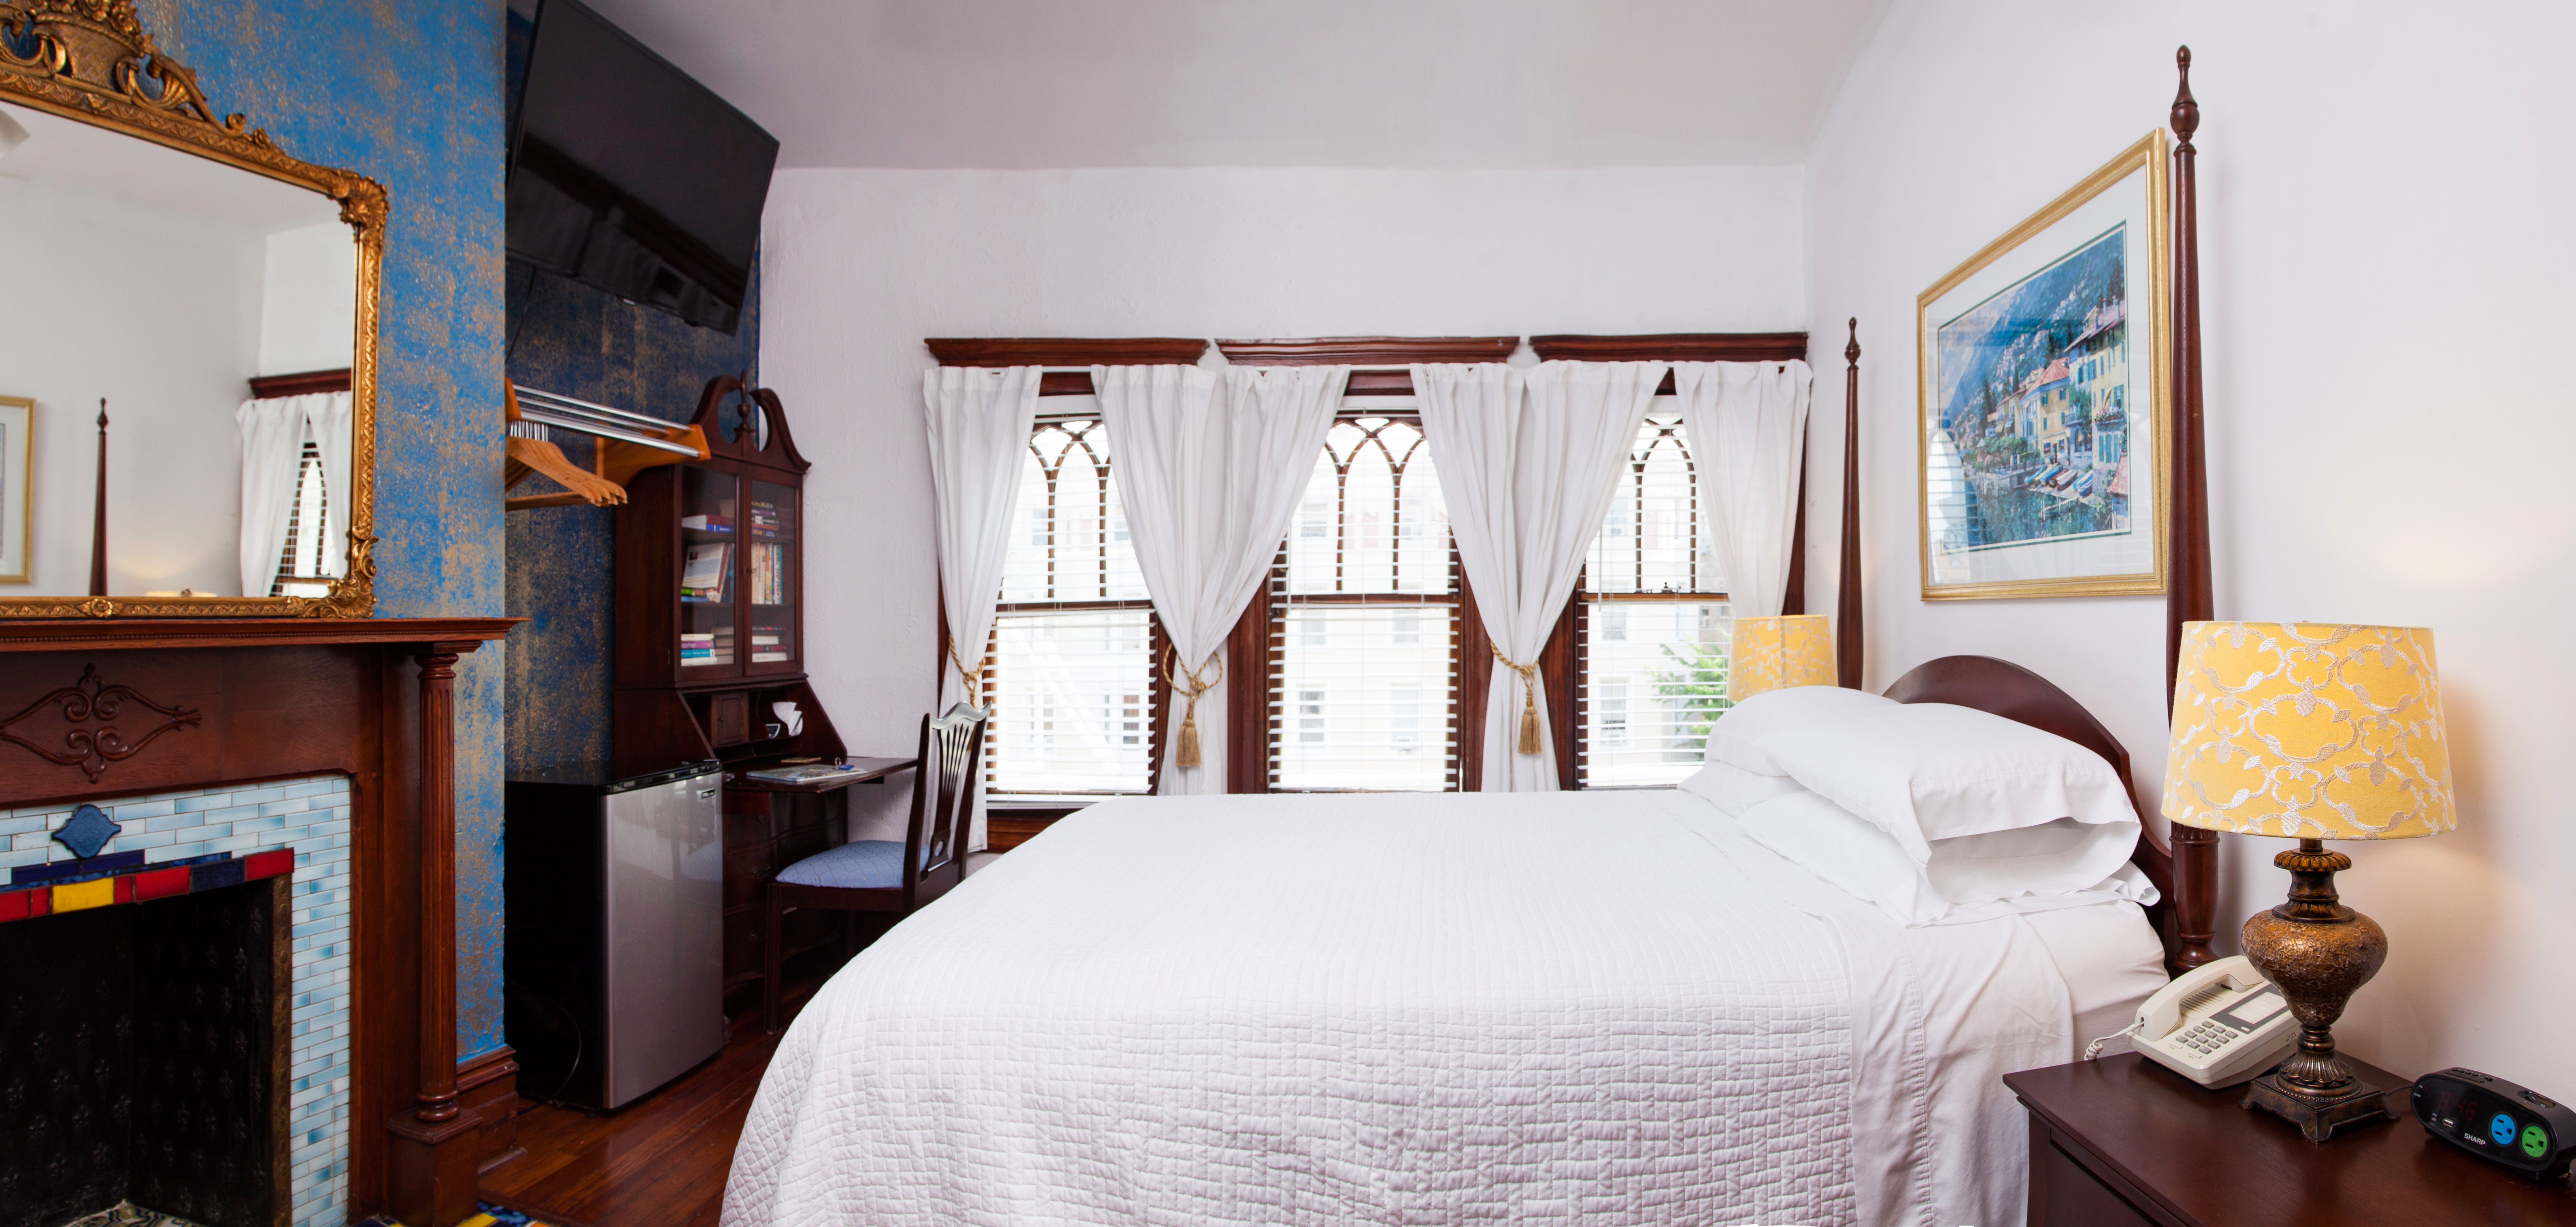 Clean and attractive guestroom with blue and white walls and ornate fireplace; featuring neatly made bed in white bedding